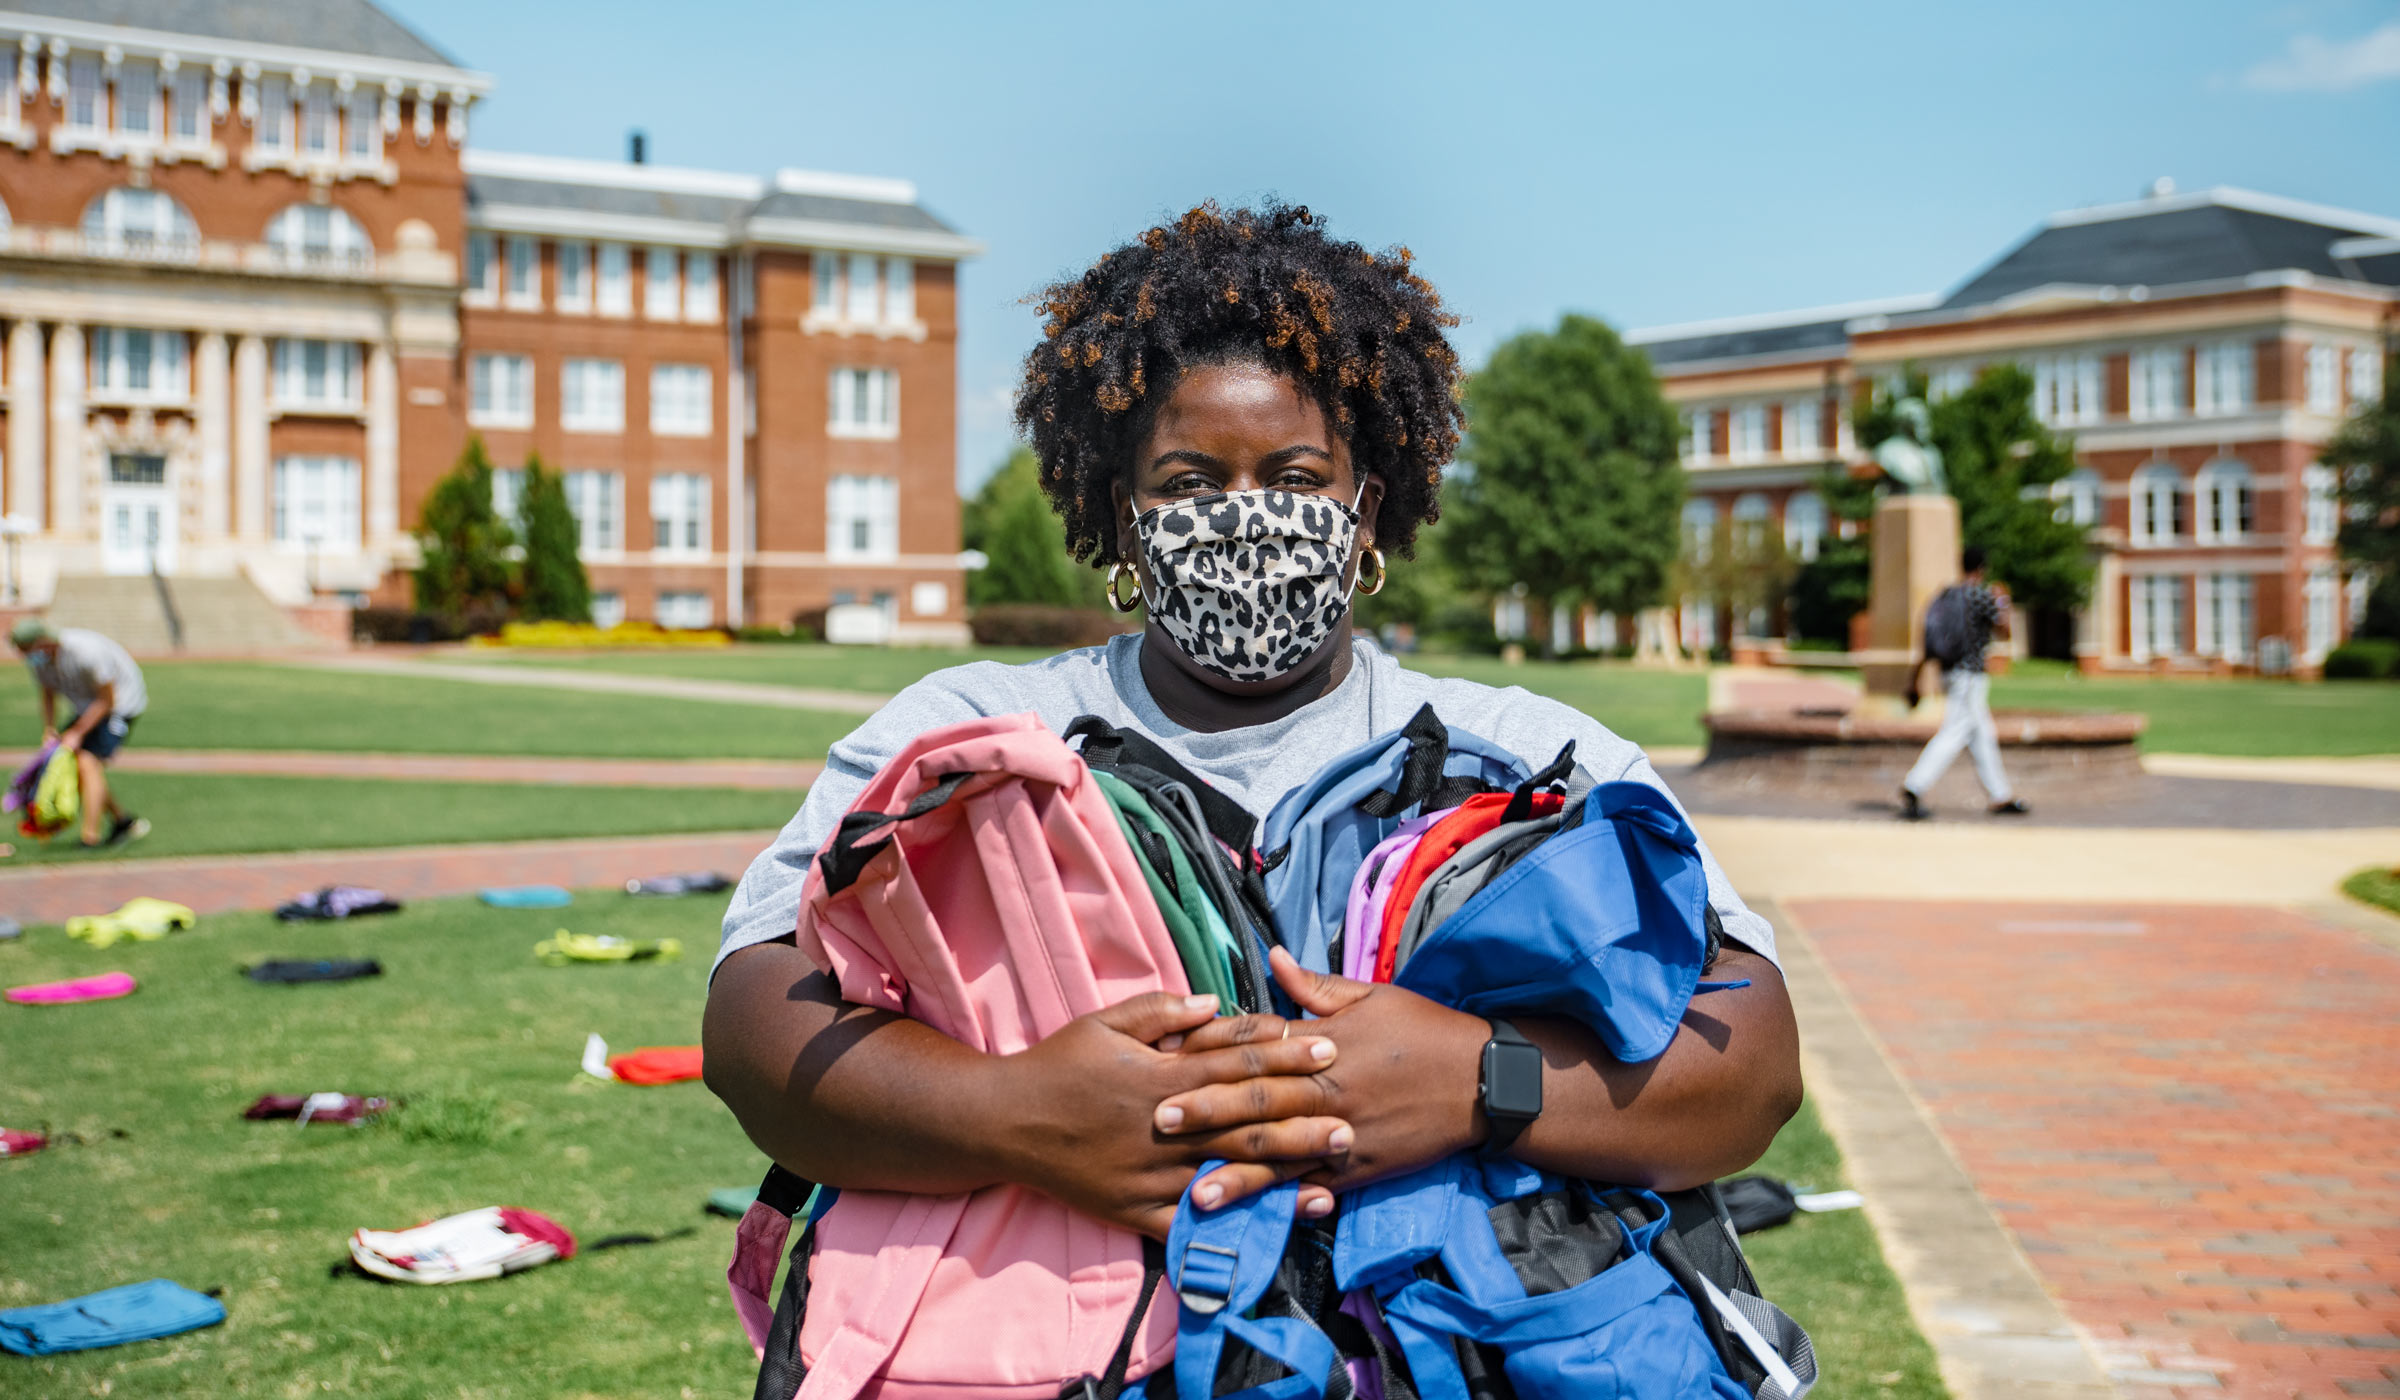 MSU graduate assistant Gillian Goodloe holds suicide awareness backpacks on the Drill Field, while wearing a mask.